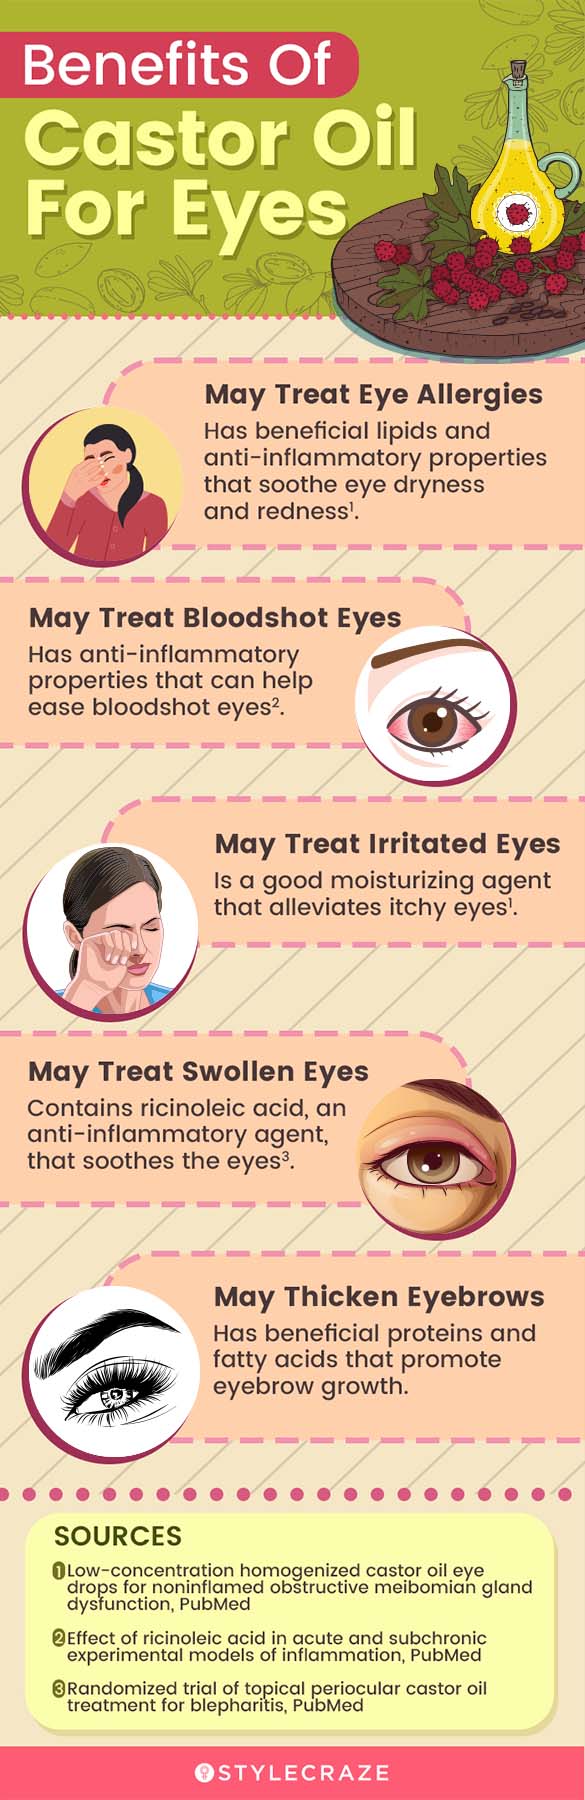 benefits of casrtor oil for eyes [infographic]